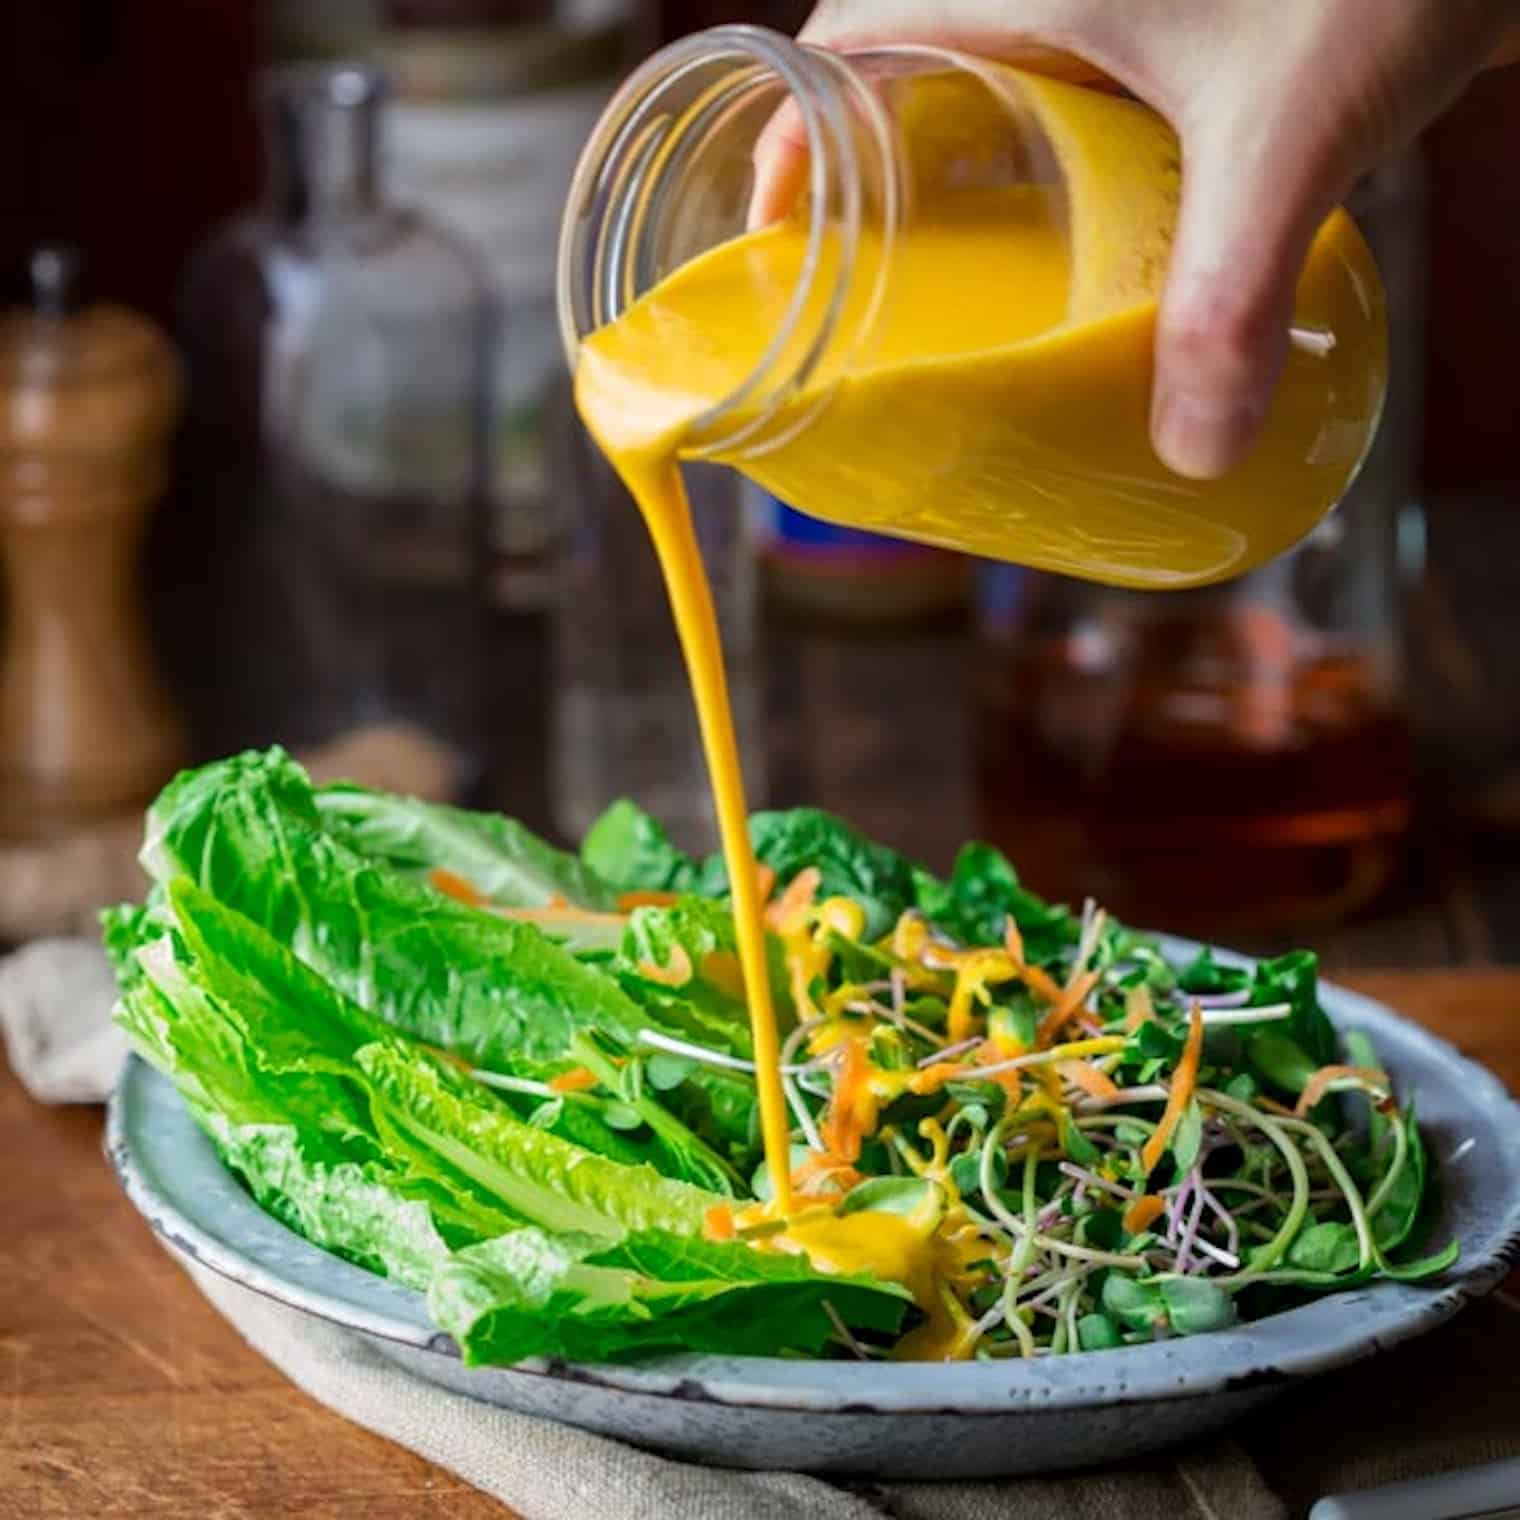 6 Salad Dressing Recipes That Donât Seem Healthy, But Are